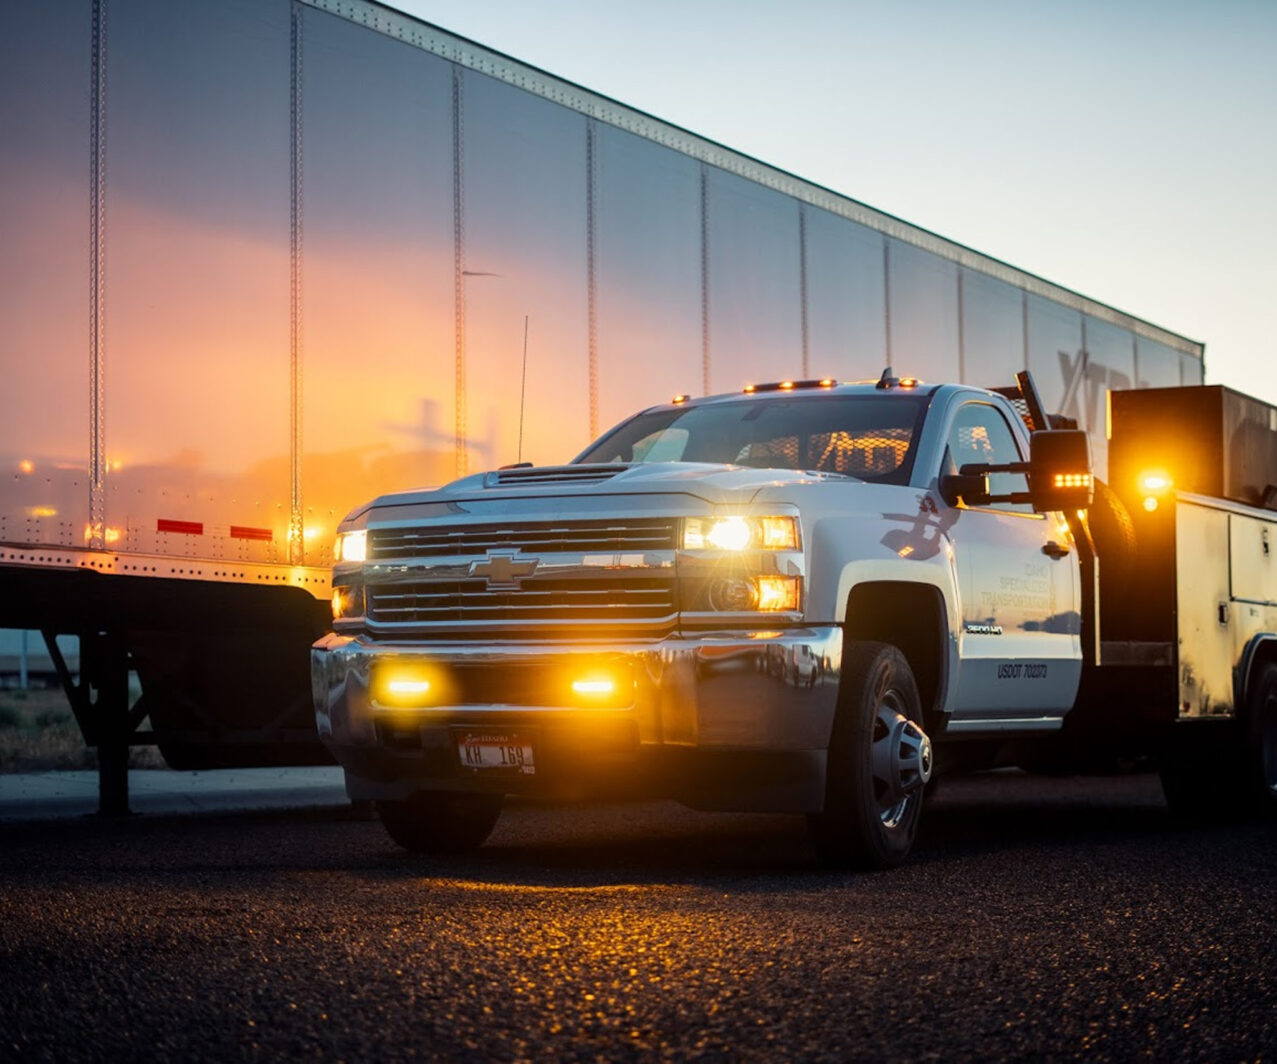 A white Chevrolet pickup truck parked next to a freight trailer at dusk